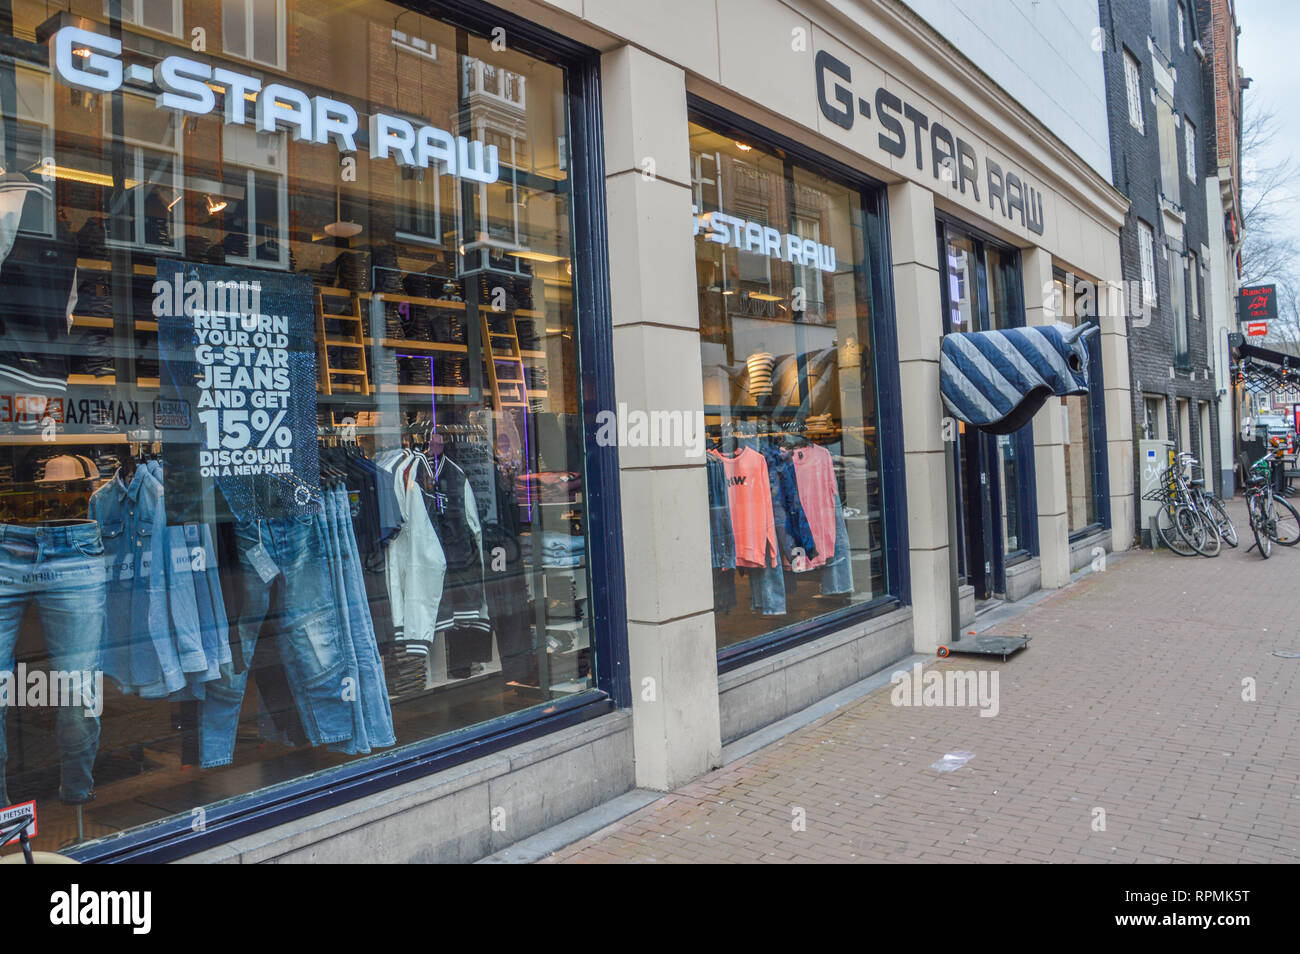 G-Star Raw Shop At Amsterdam The Netherlands 2018 Stock Photo - Alamy